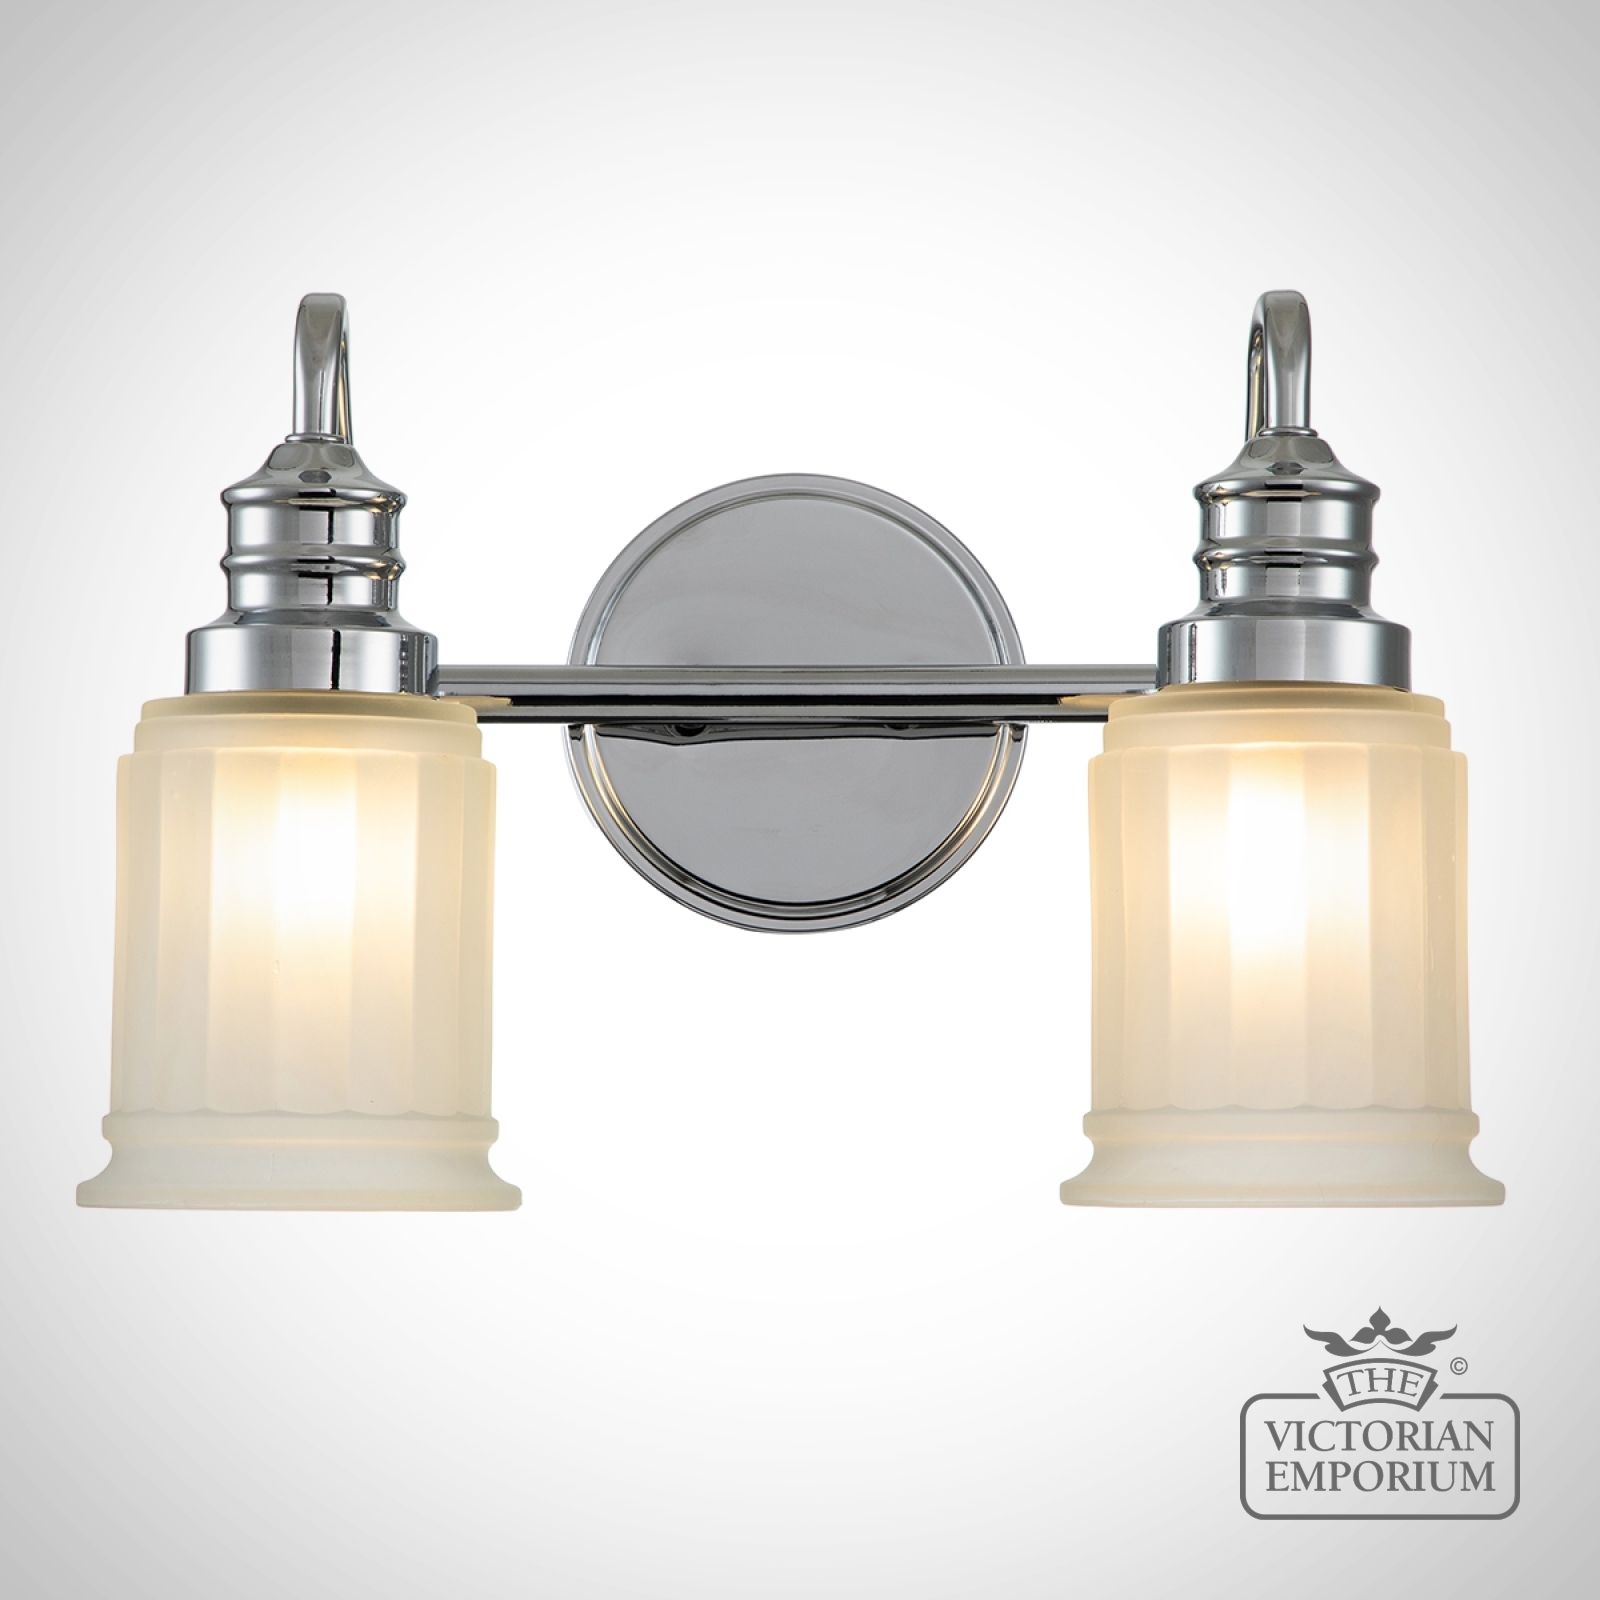 Swell Double Bathroom Wall Light in Polished Chrome